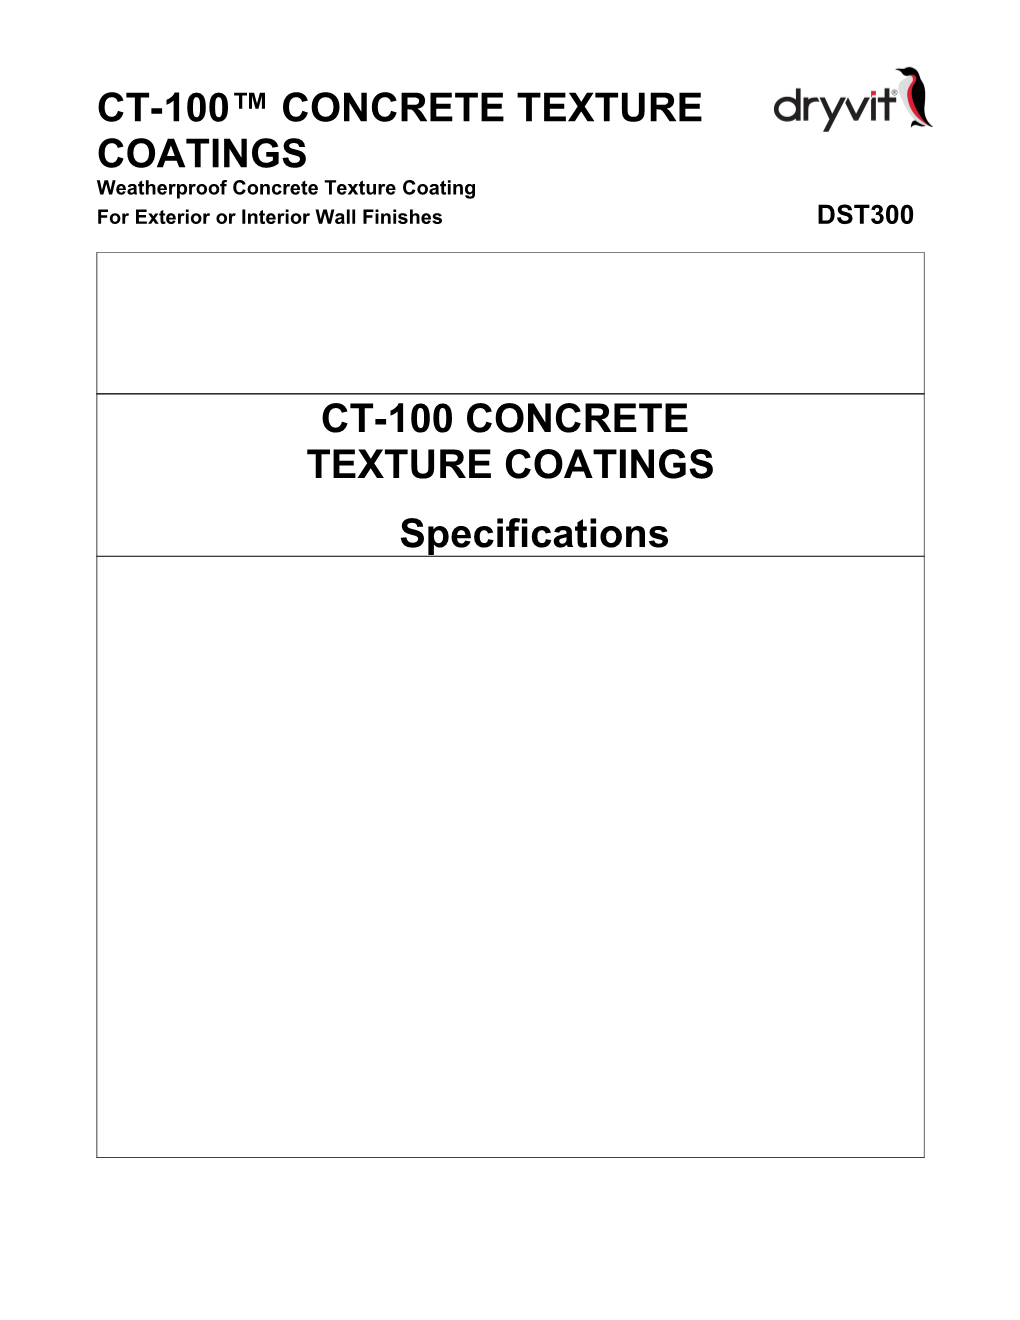 CT-100 Concrete Texture Coatings Specifications DST300